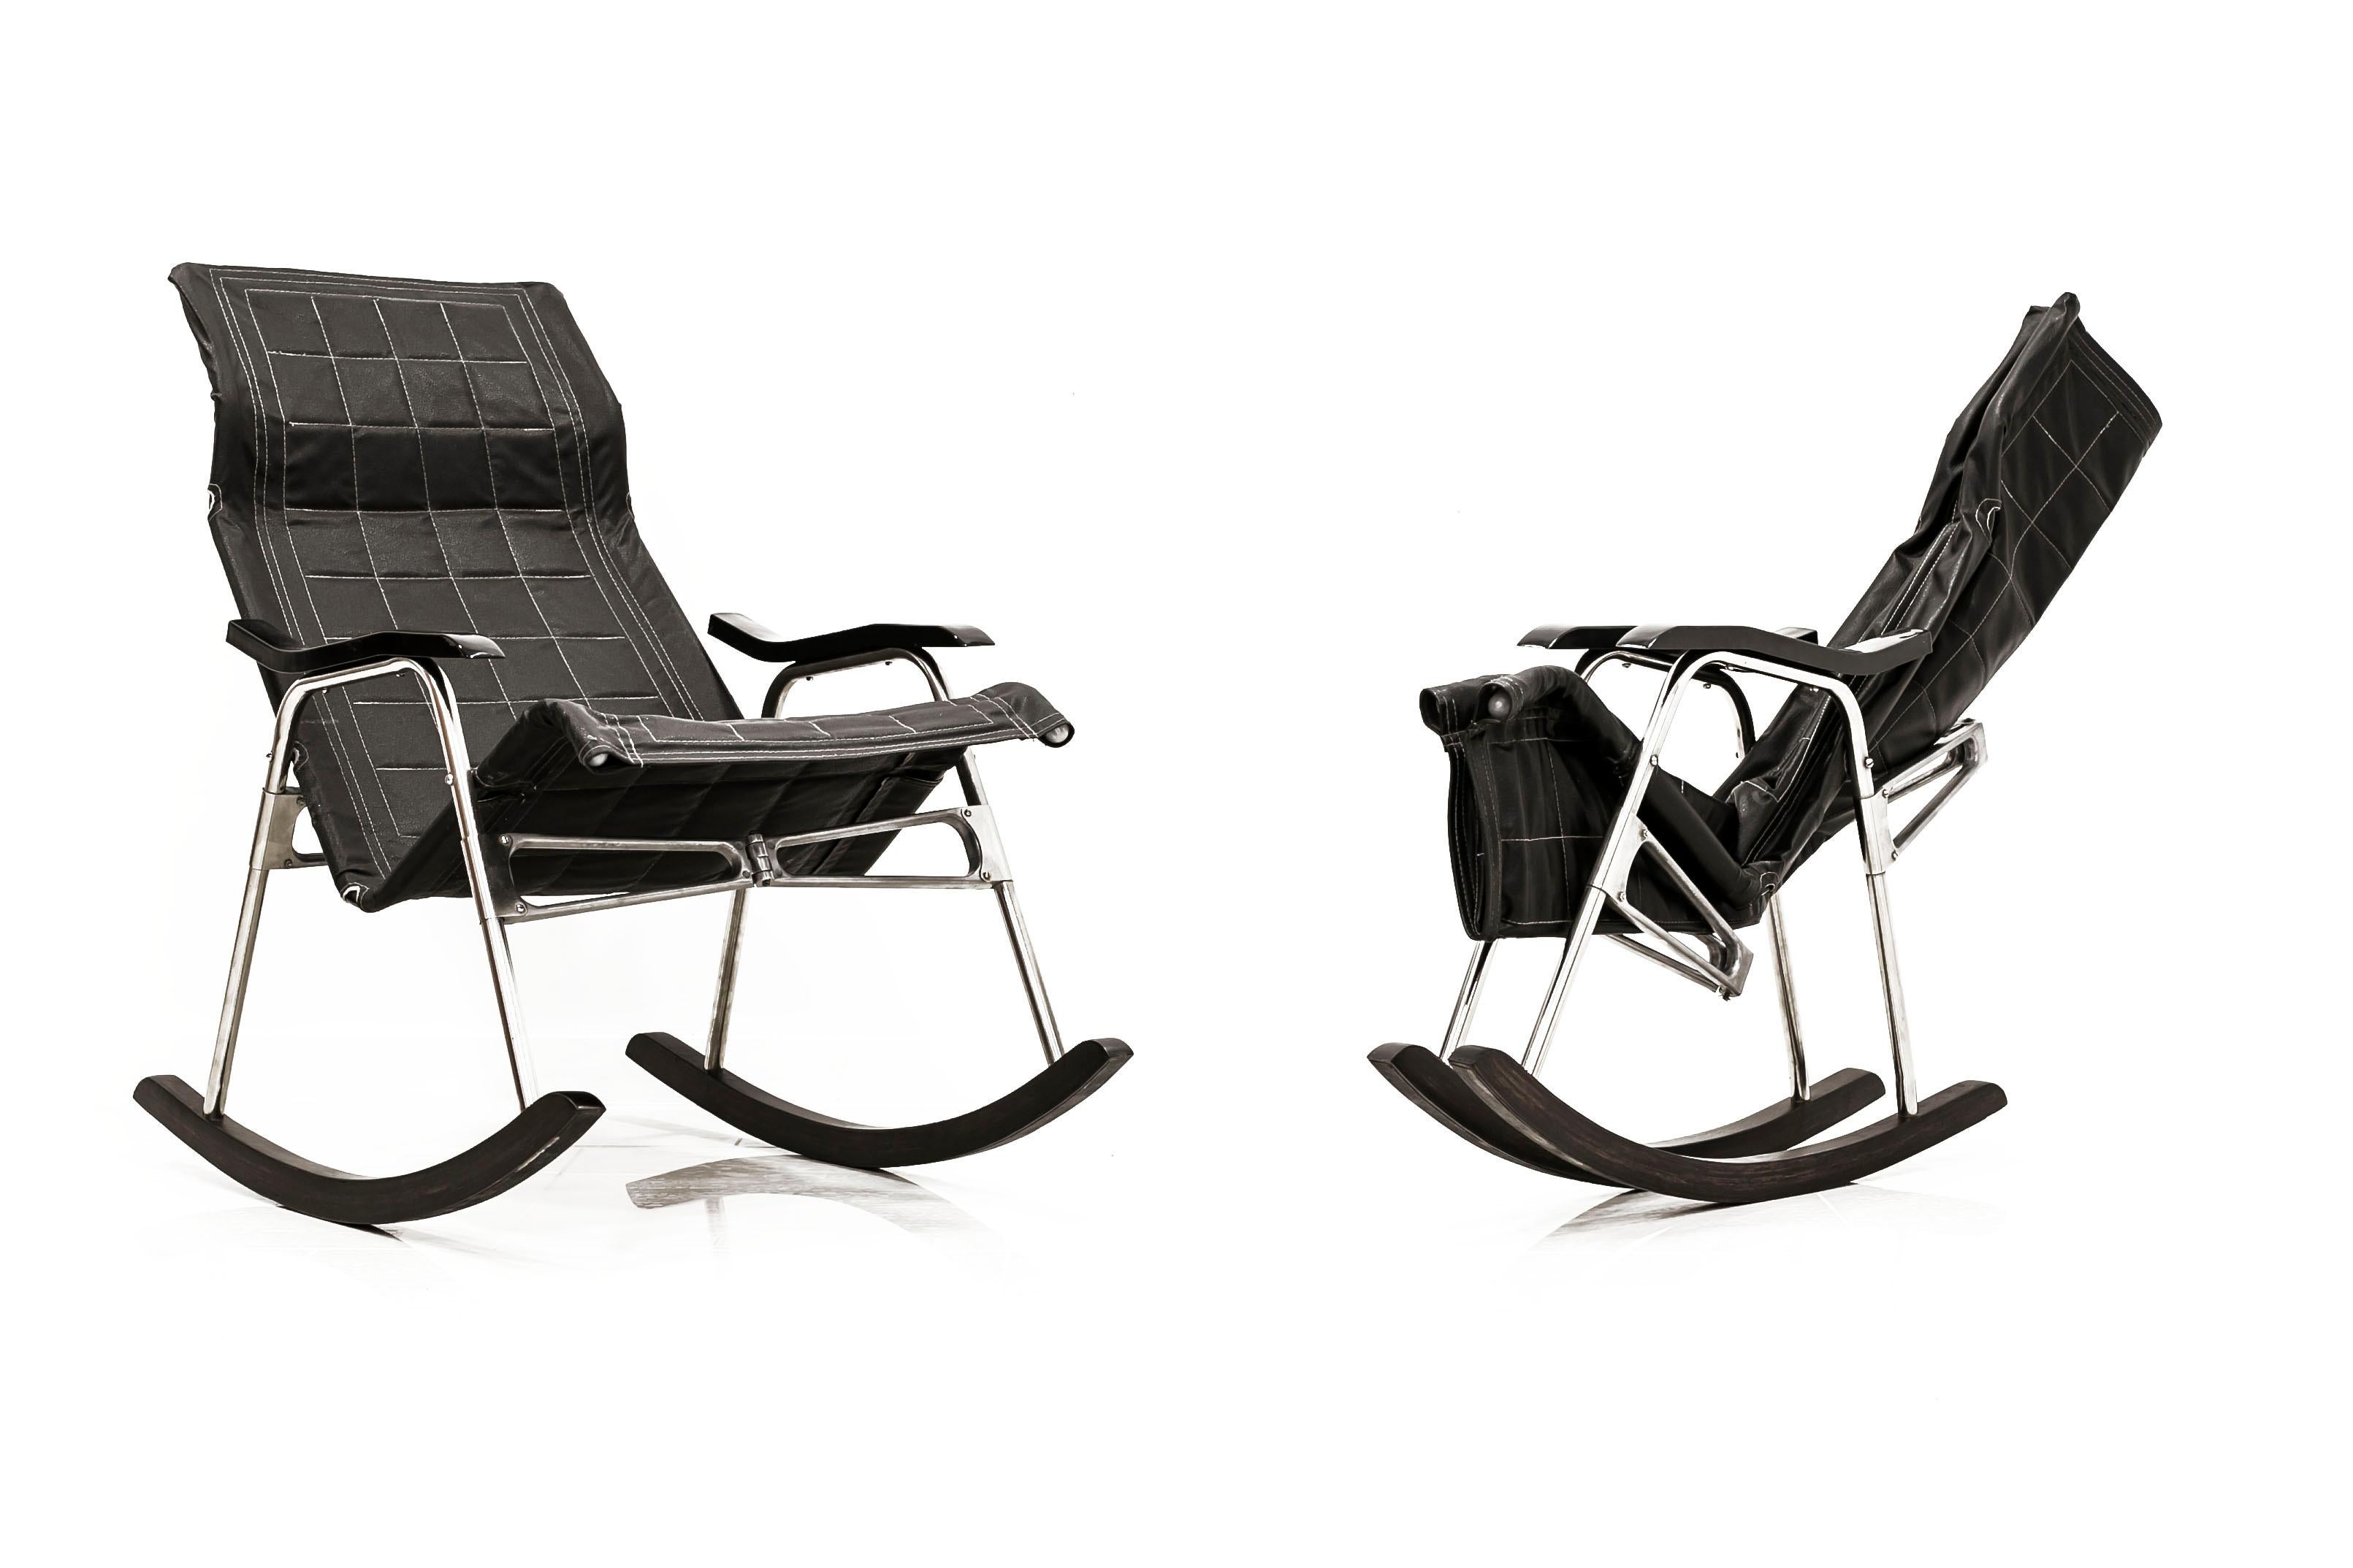 This set of 2 rocking chairs was designed by Takeshi Nii and produced in the 1950s. The upholstery is made of natural leather in black with white stitching. The frame is made of aluminium and the skids are made of solid wood. The armrests are made